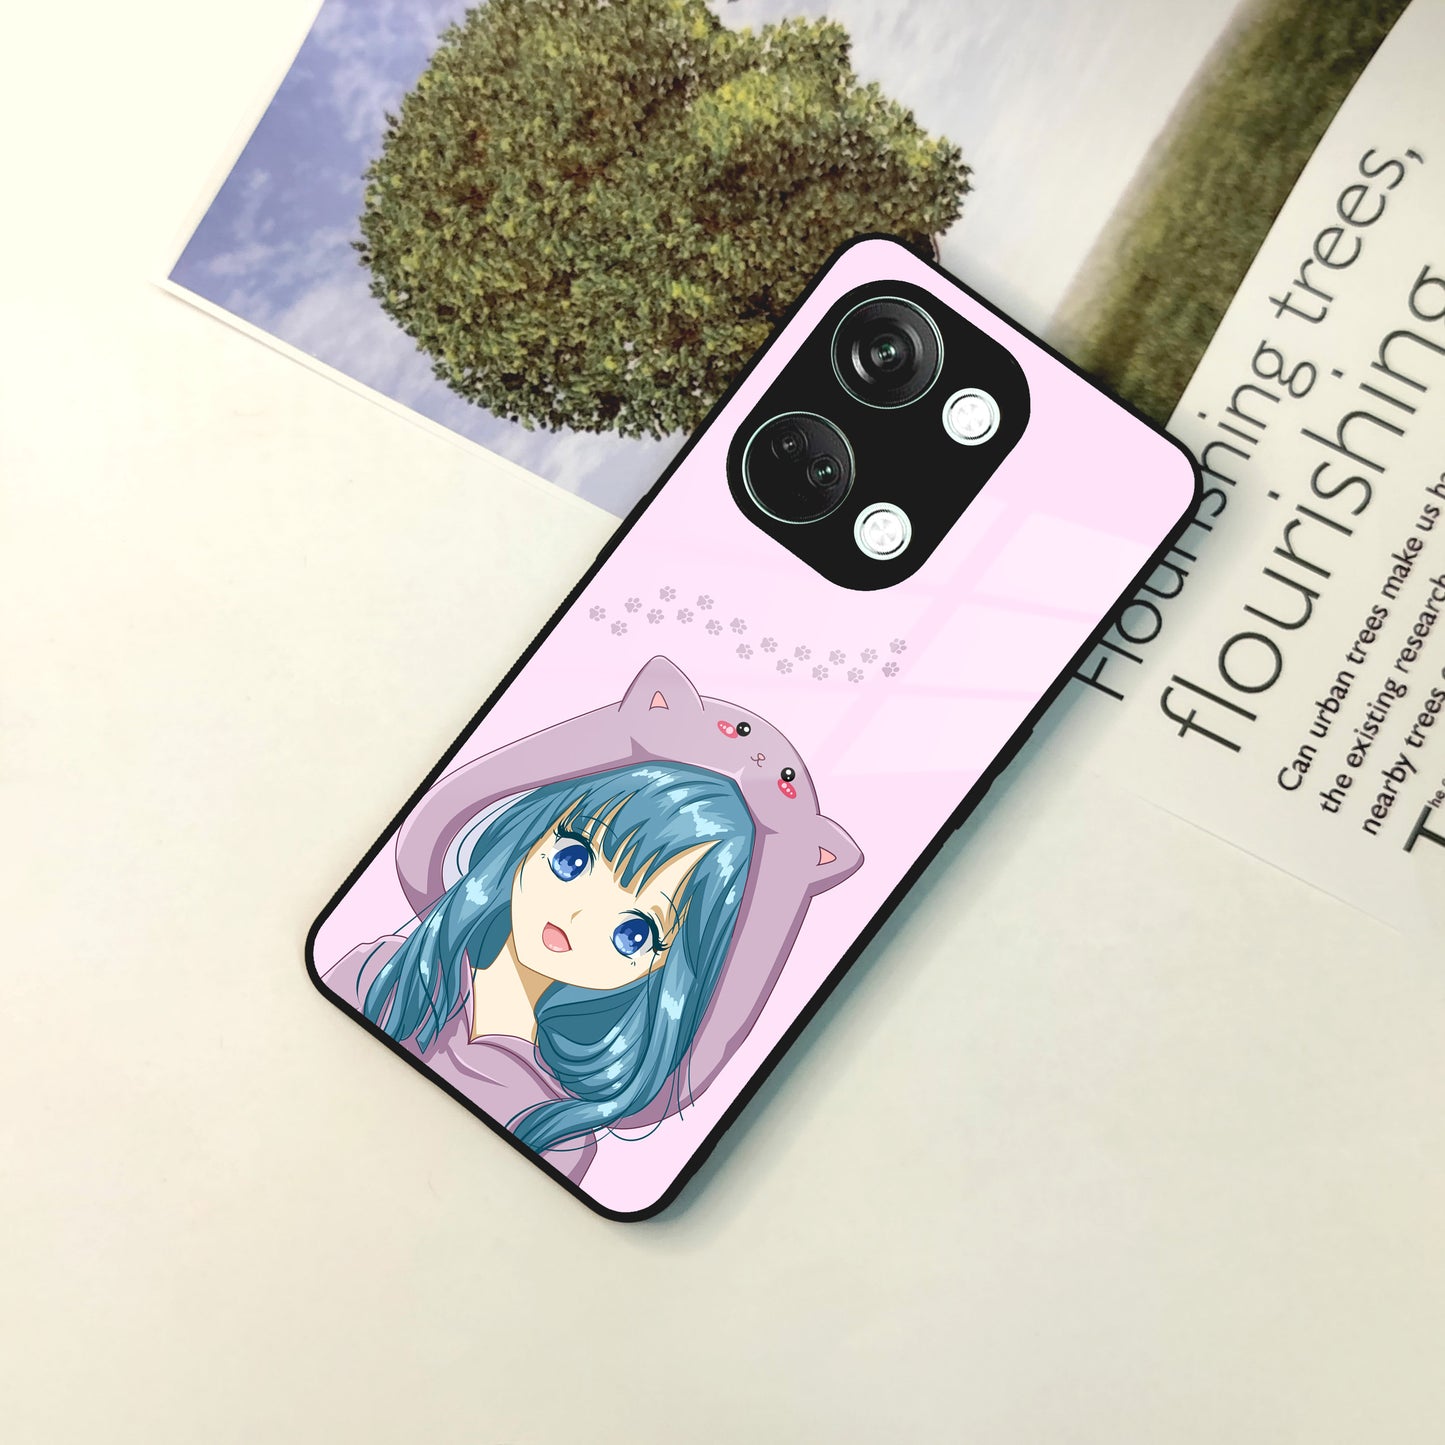 Purple Aesthetic Girl With Cat Phone Glass Case Cover For OnePlus